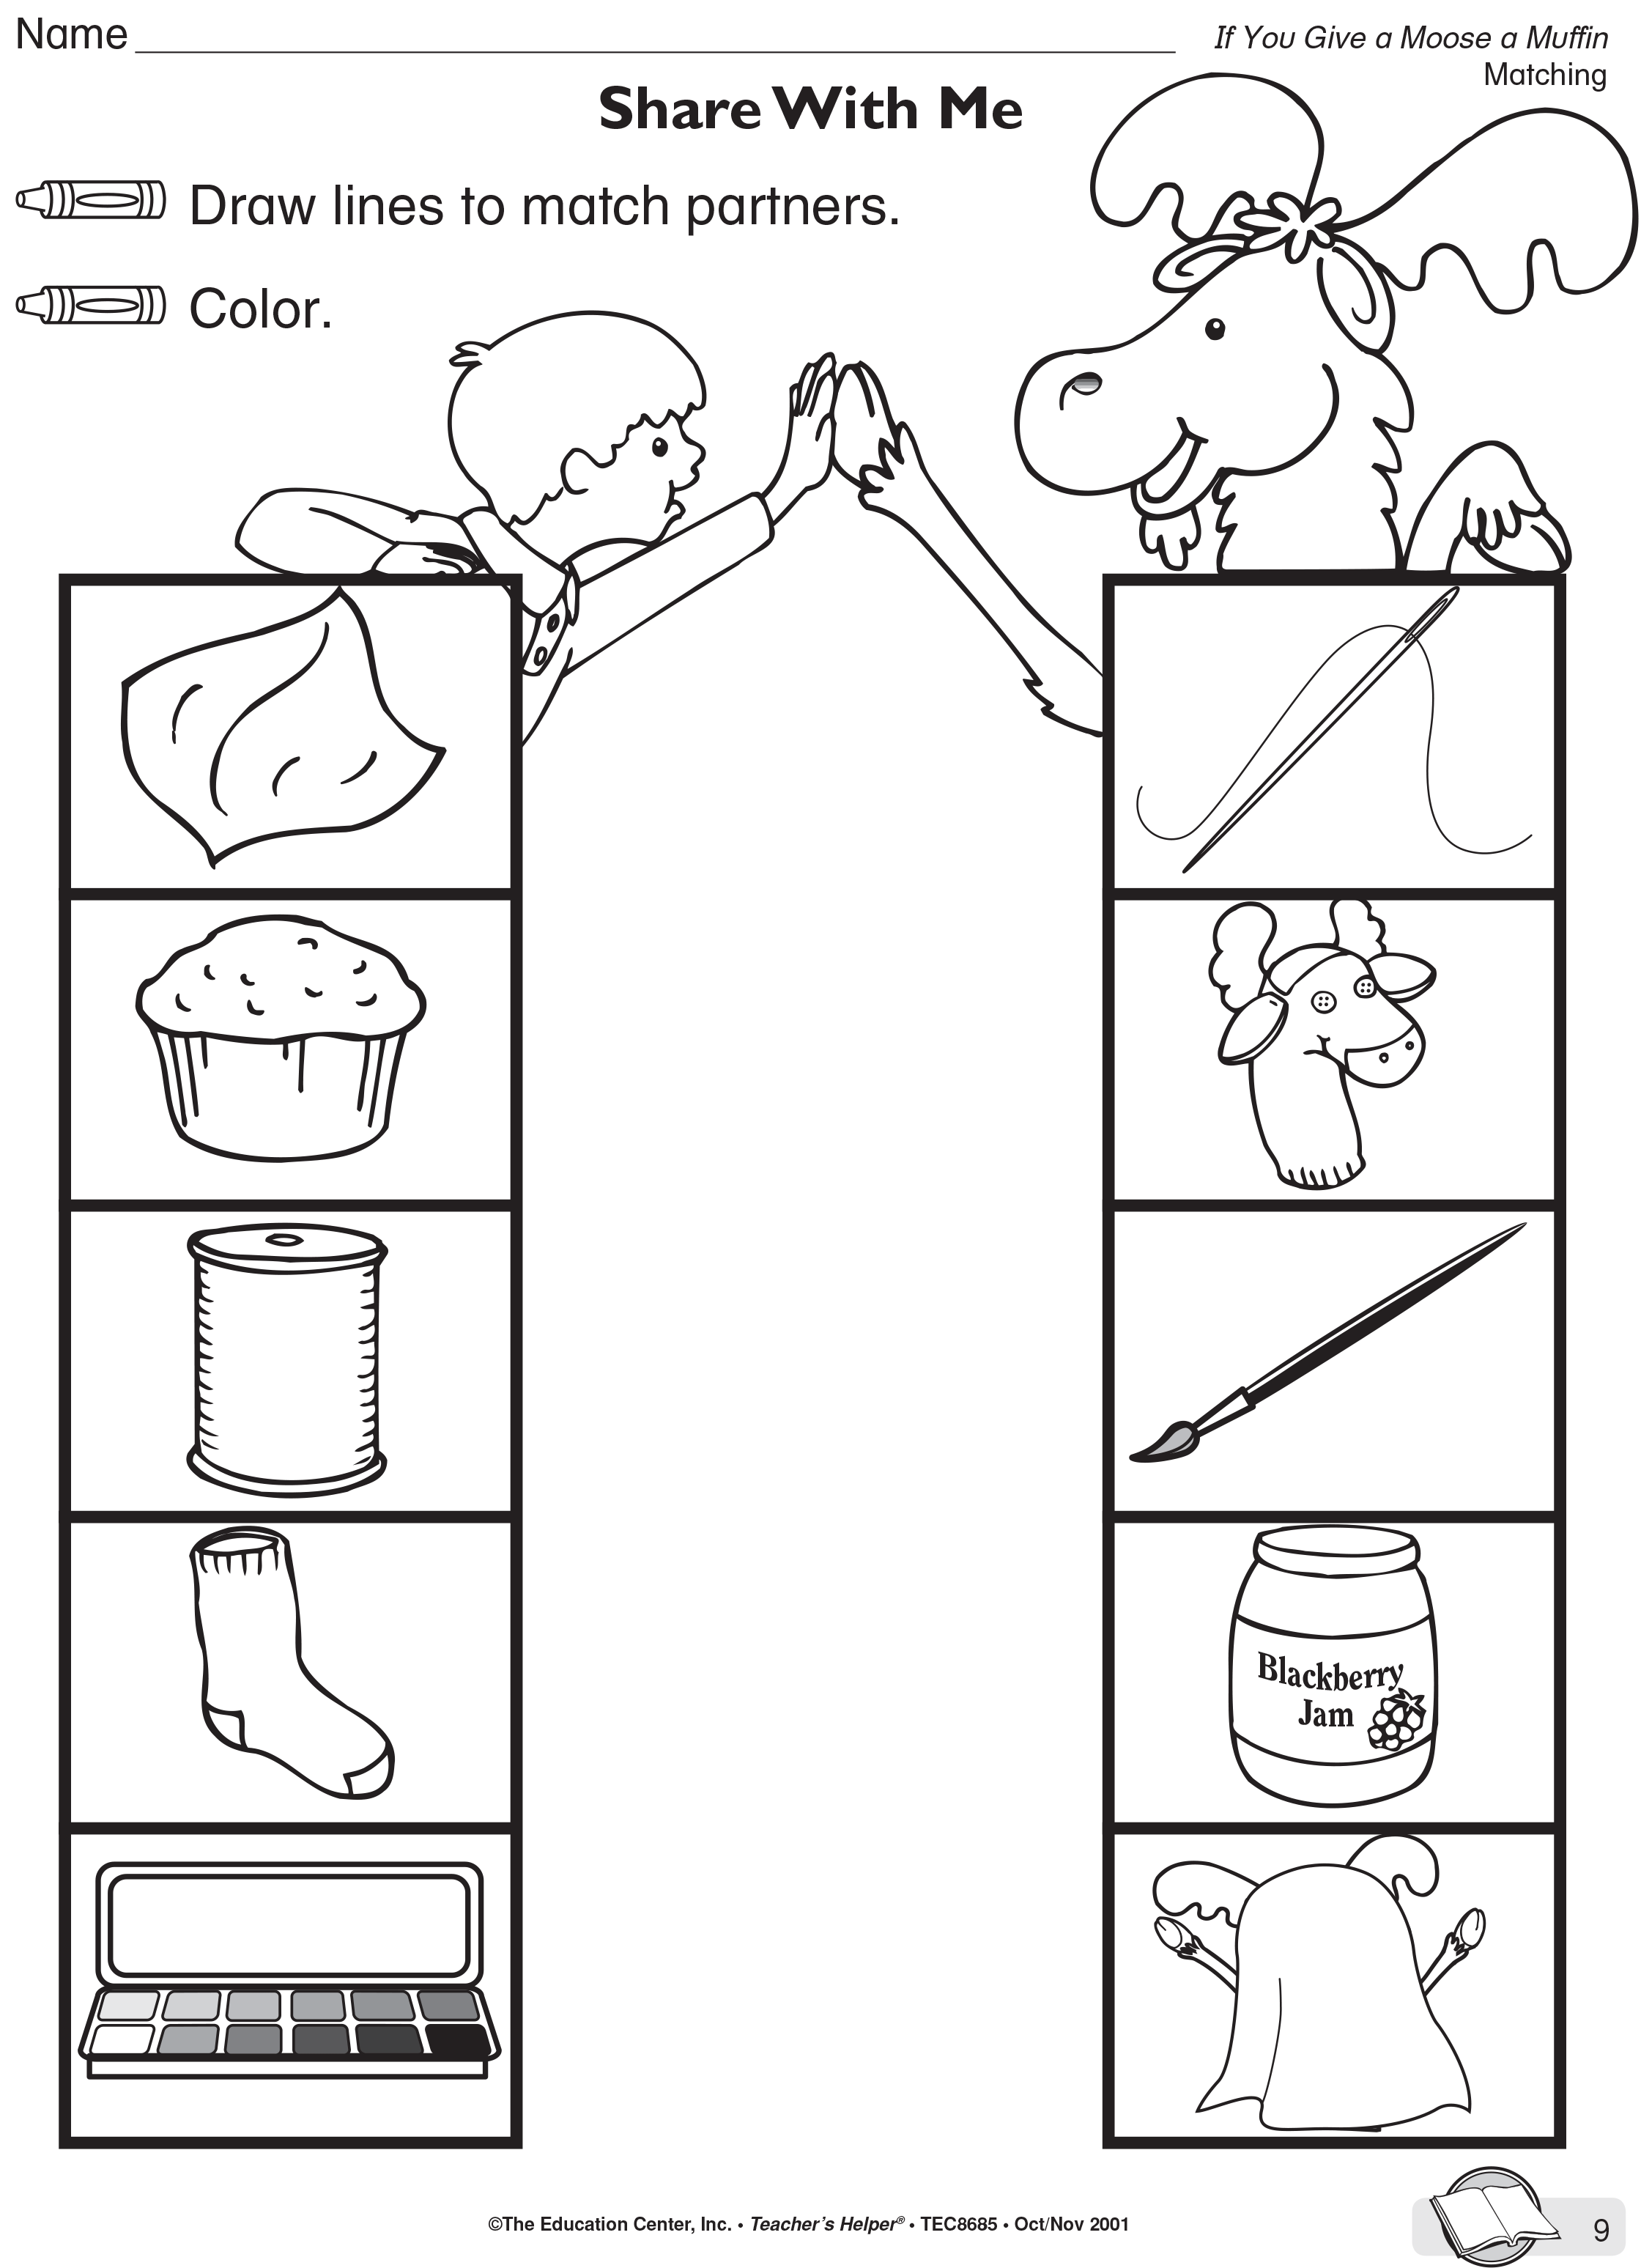 Muffin Coloring Sheet - Coloring Pages for Kids and for Adults